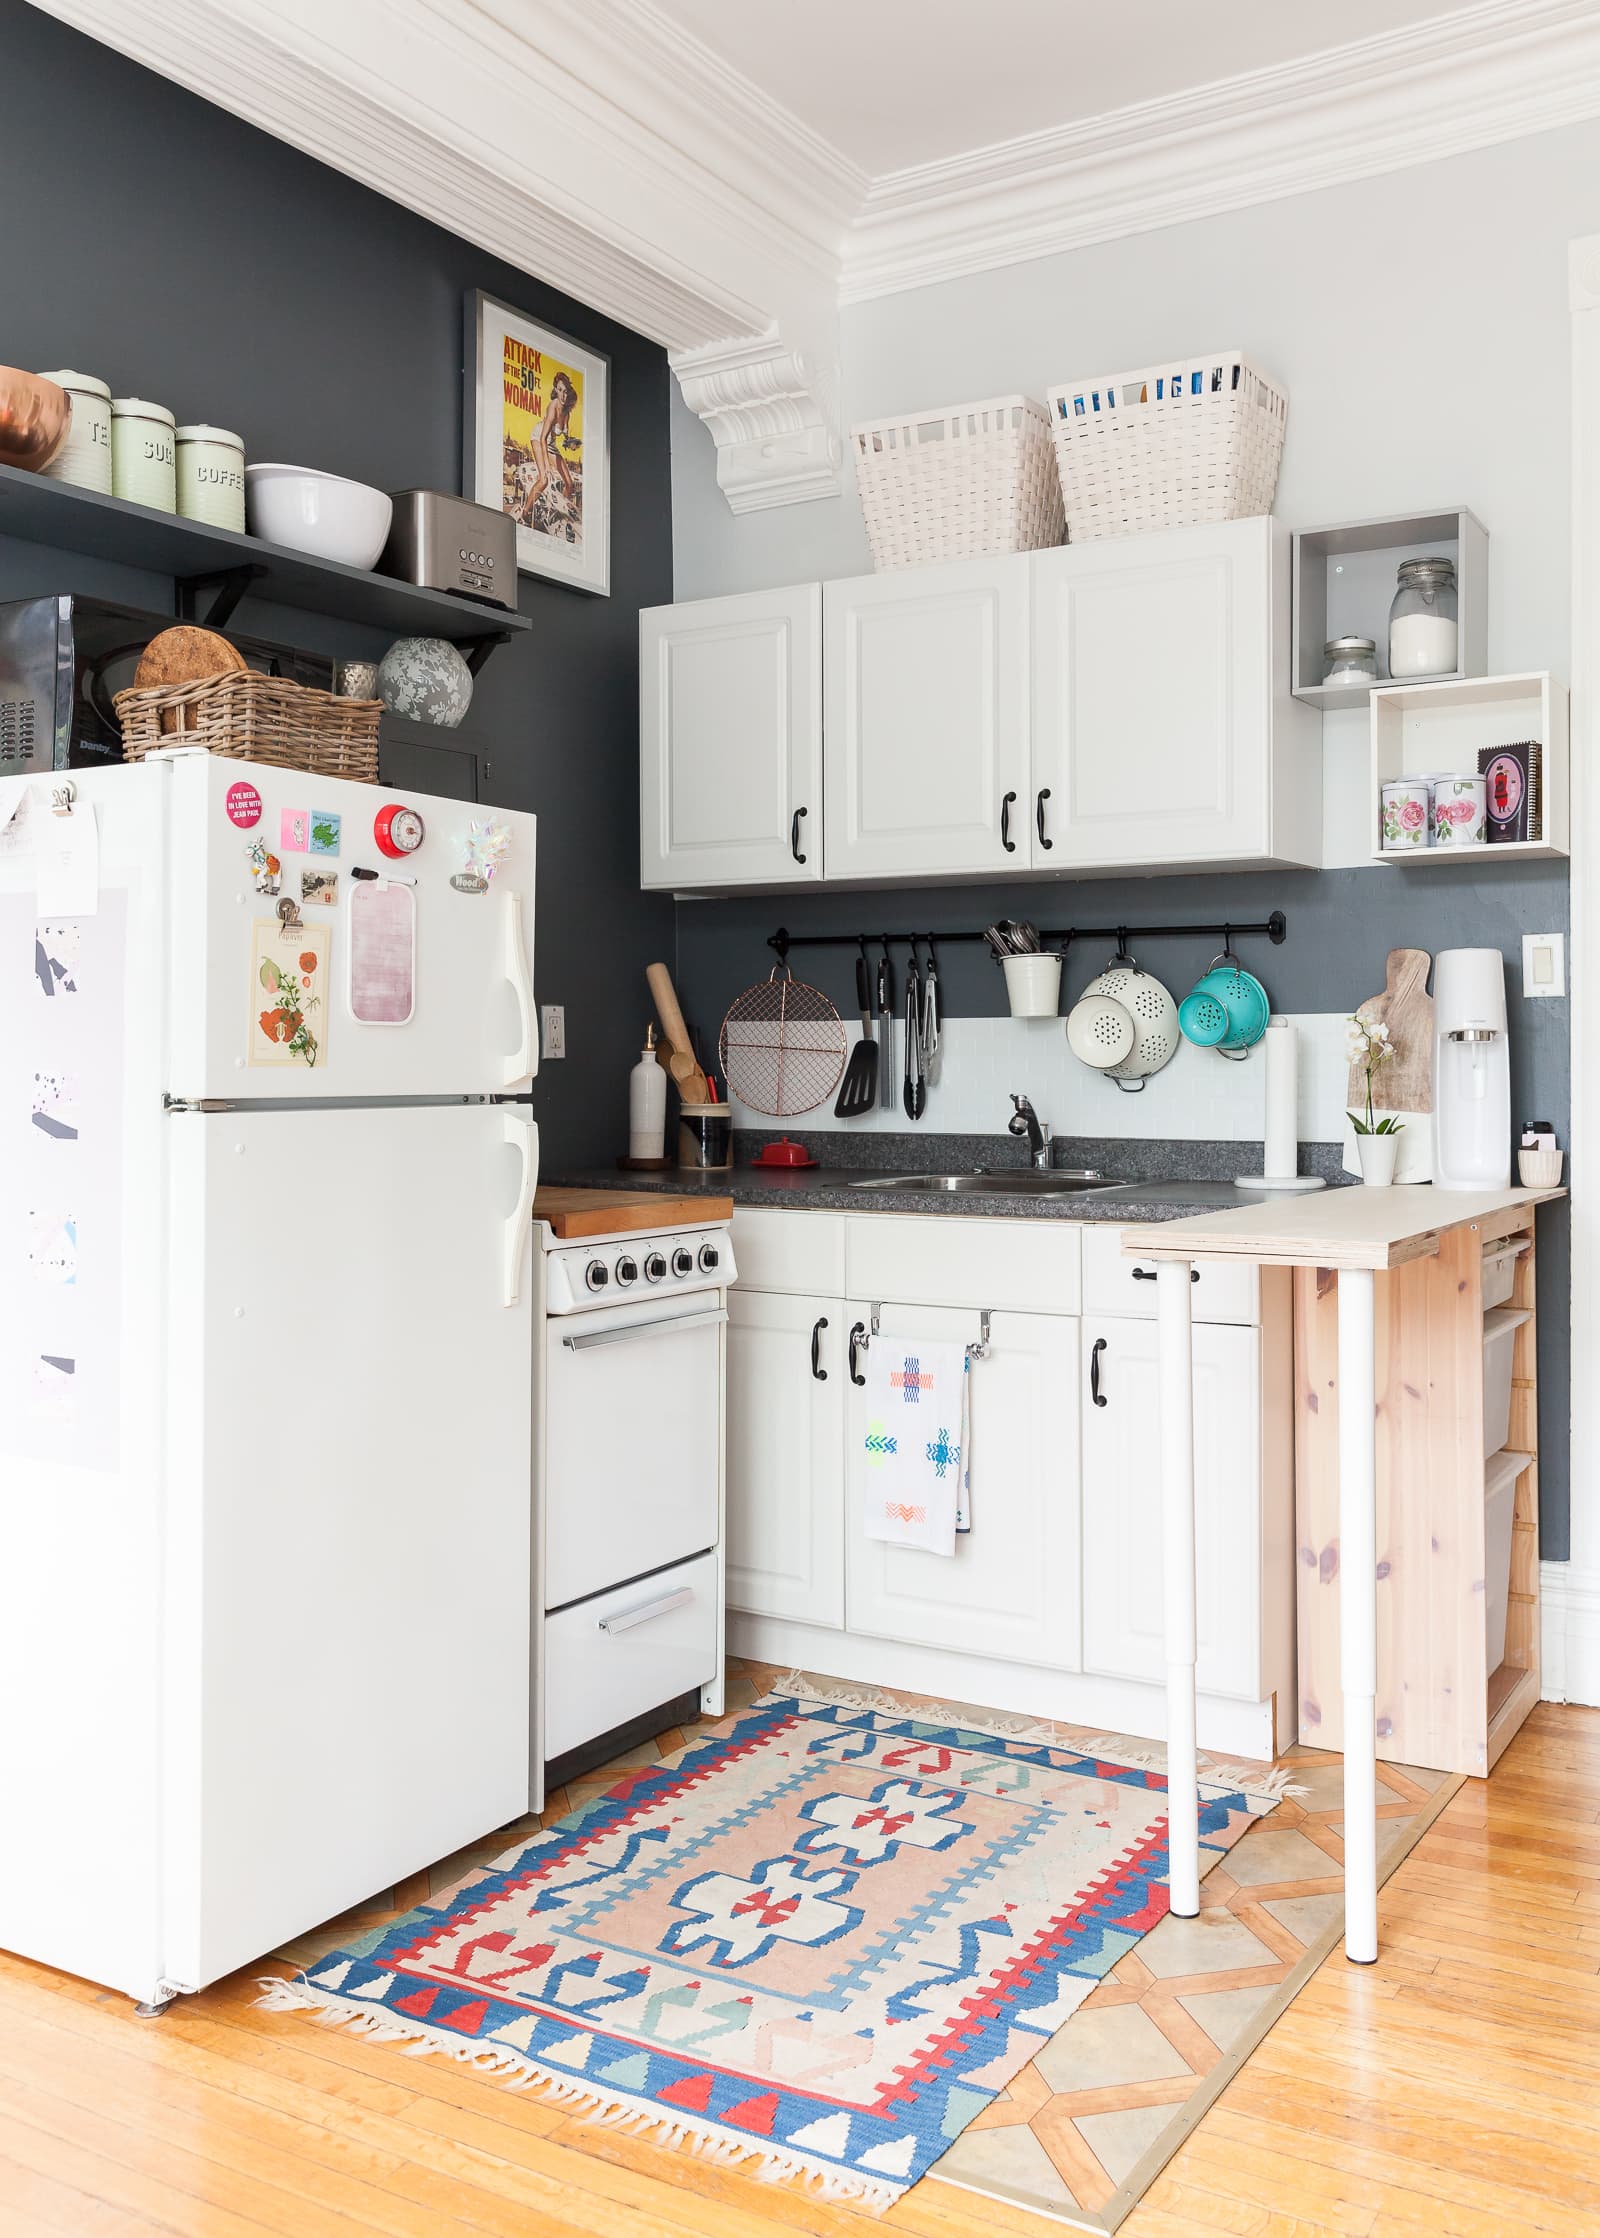 6 ways to get more kitchen space - CNET